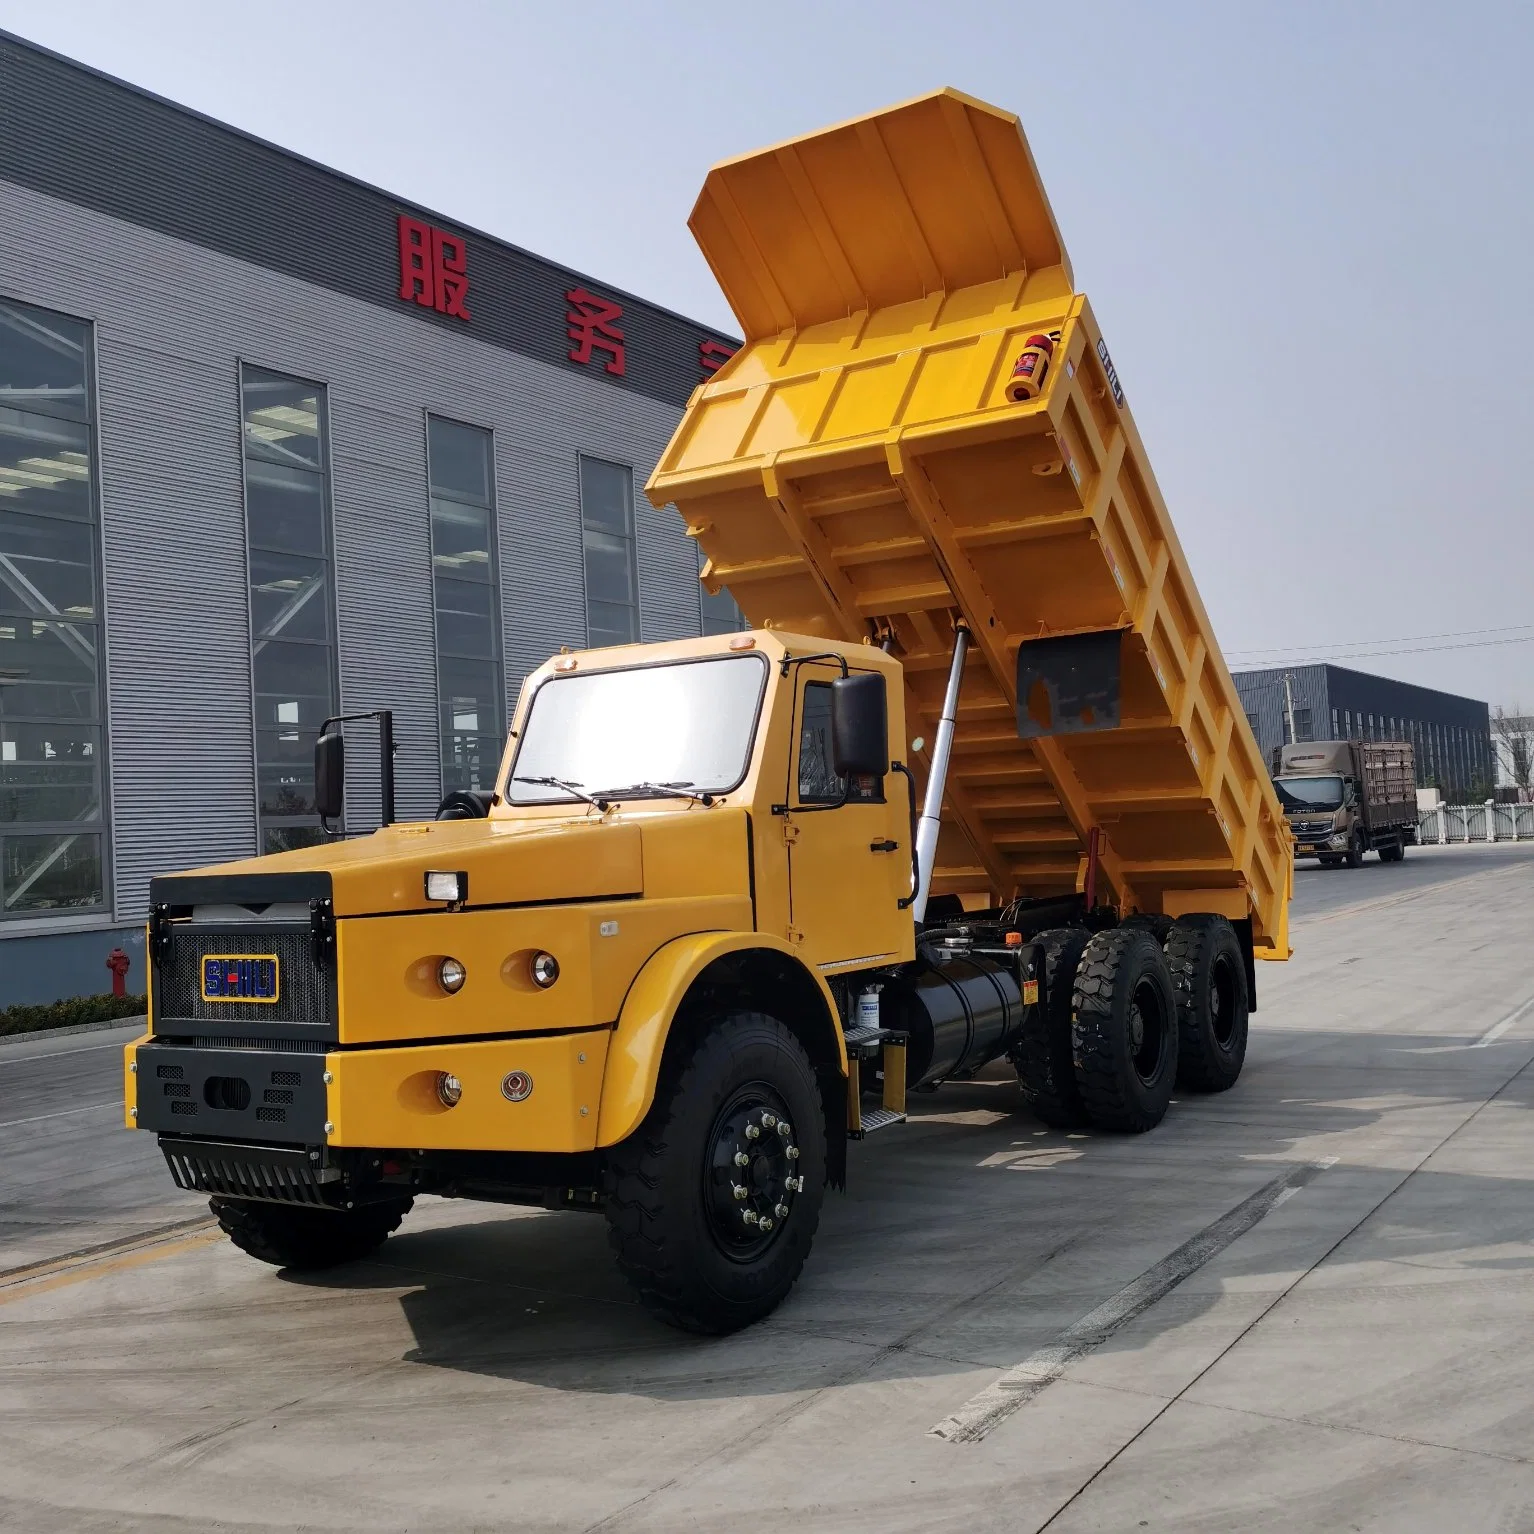 Powerful 10-Wheel Dump Truck for Transporting Heavy Loads in Mining Environments